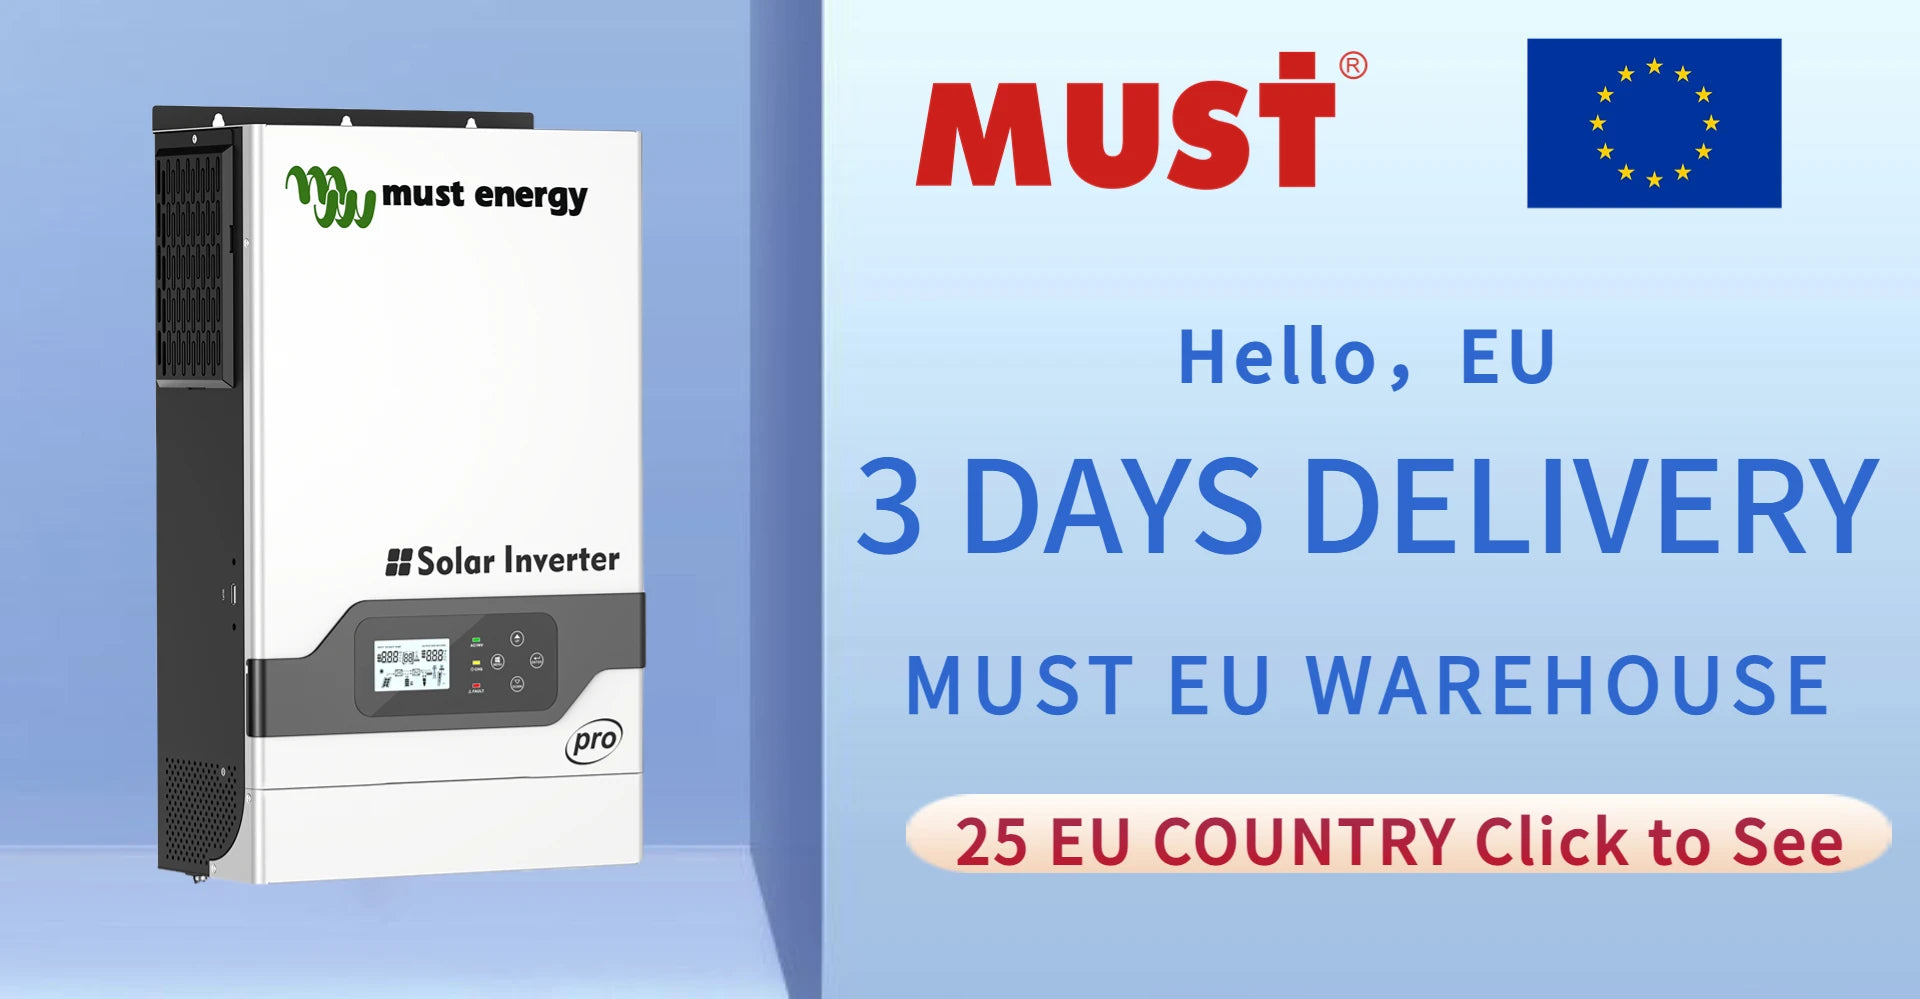 Must Energy's MUST 2023 solar inverter with fast 3-day delivery and EU warehouse for 25 countries.